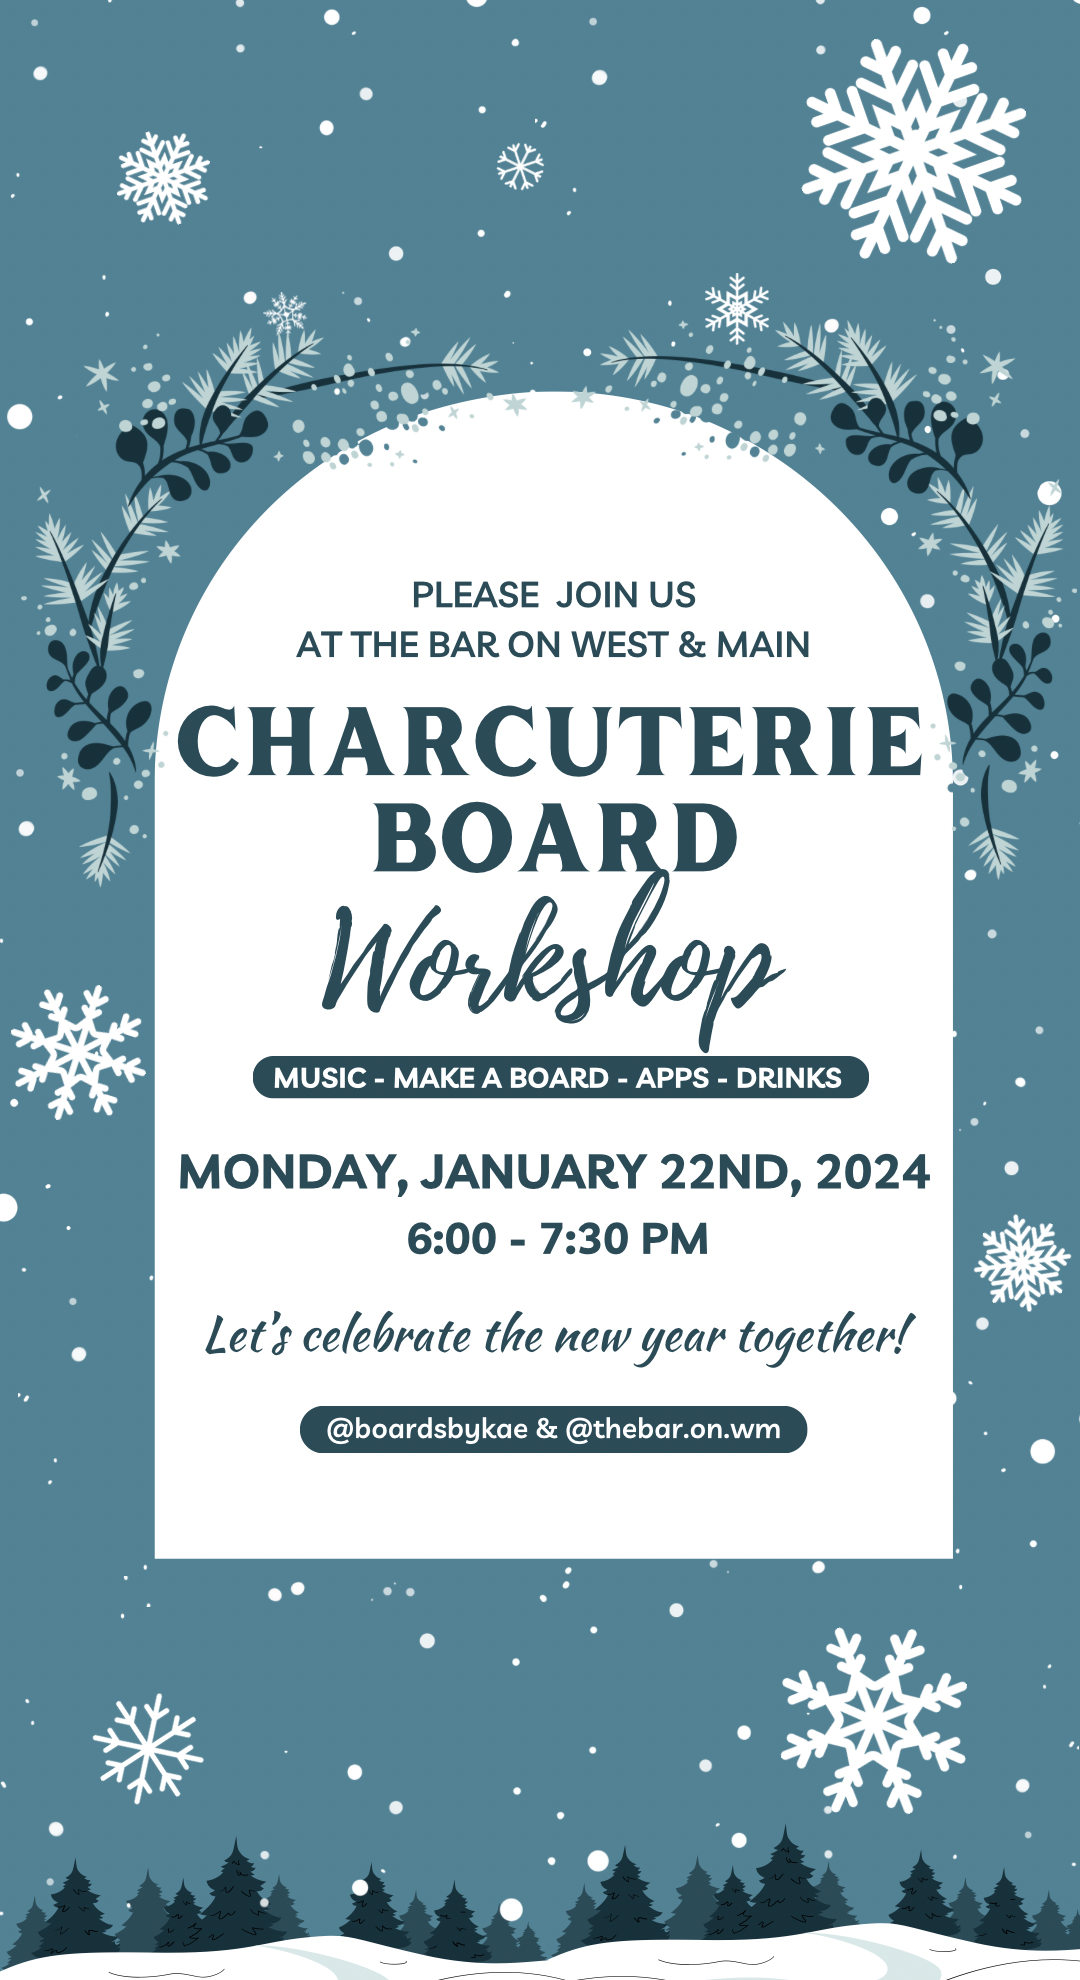 The Bar on West & Main - Winter Charcuterie Board Workshop (Monday, January 22nd 6-7:30pm)